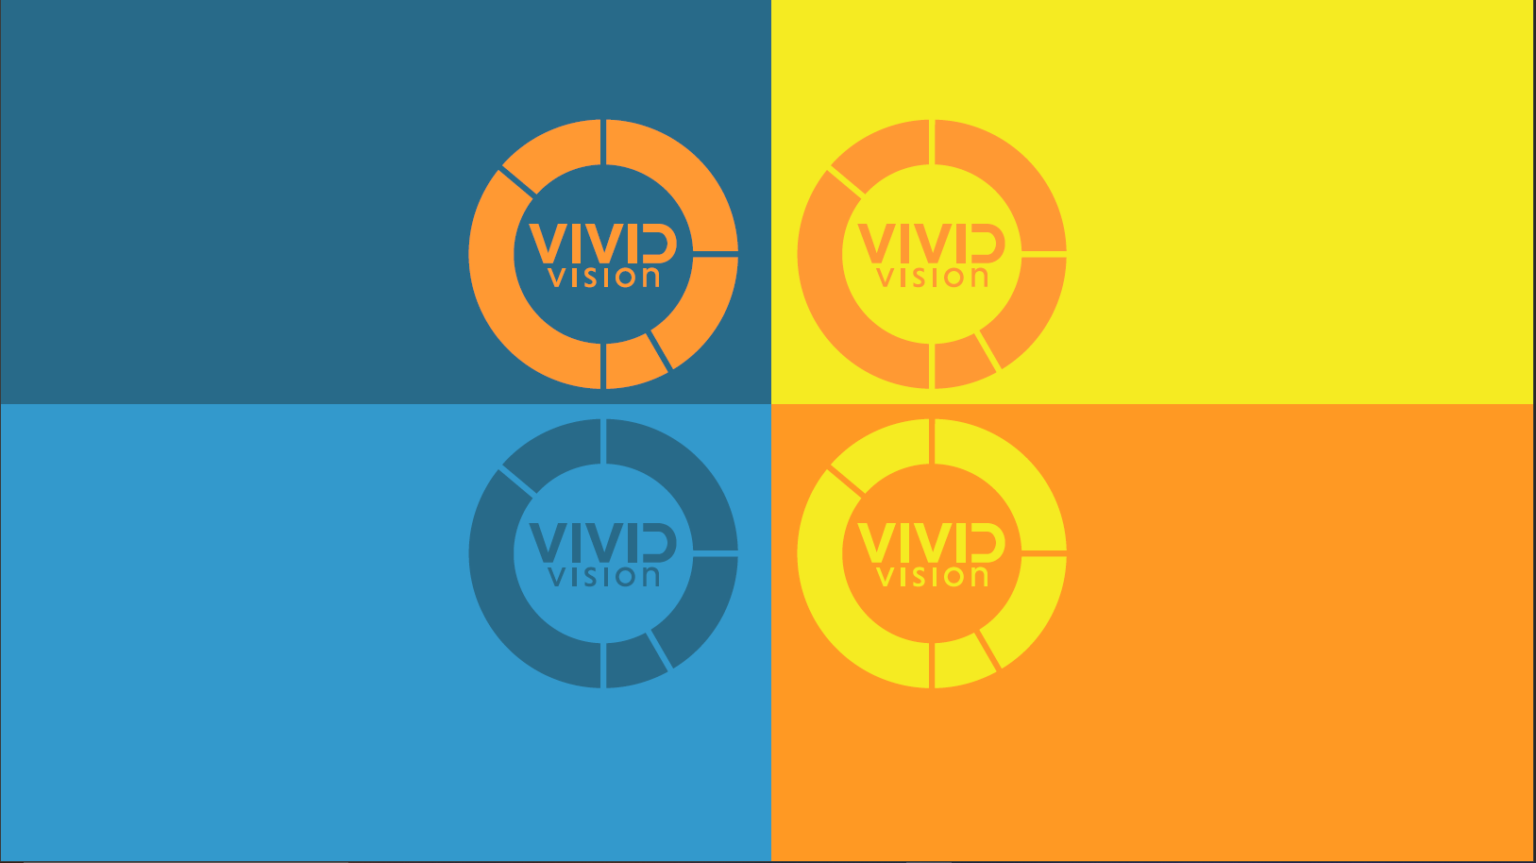 Style guides for Vivid Vision